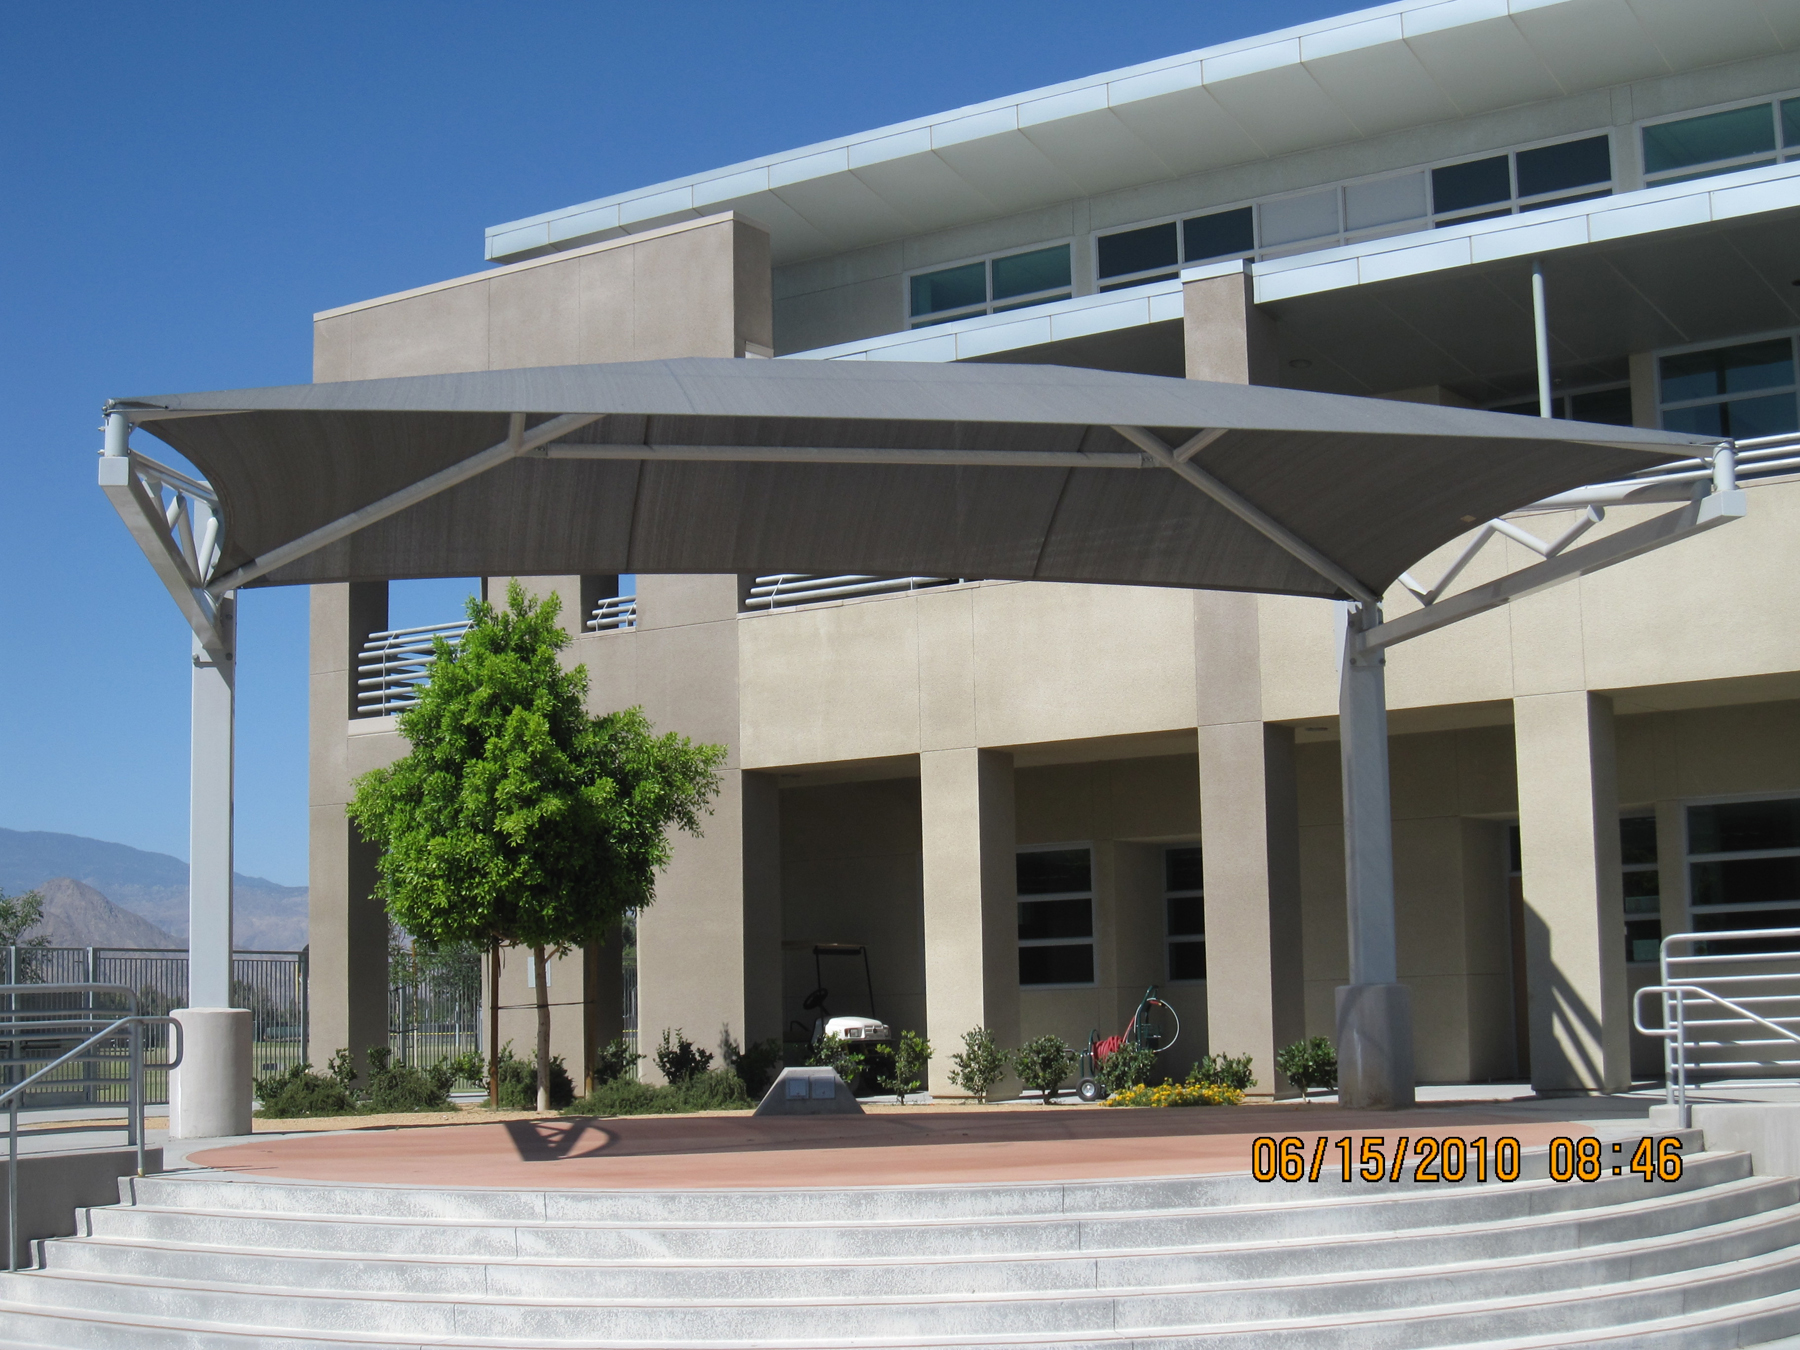 rectangle usa shade covering patio outside high school